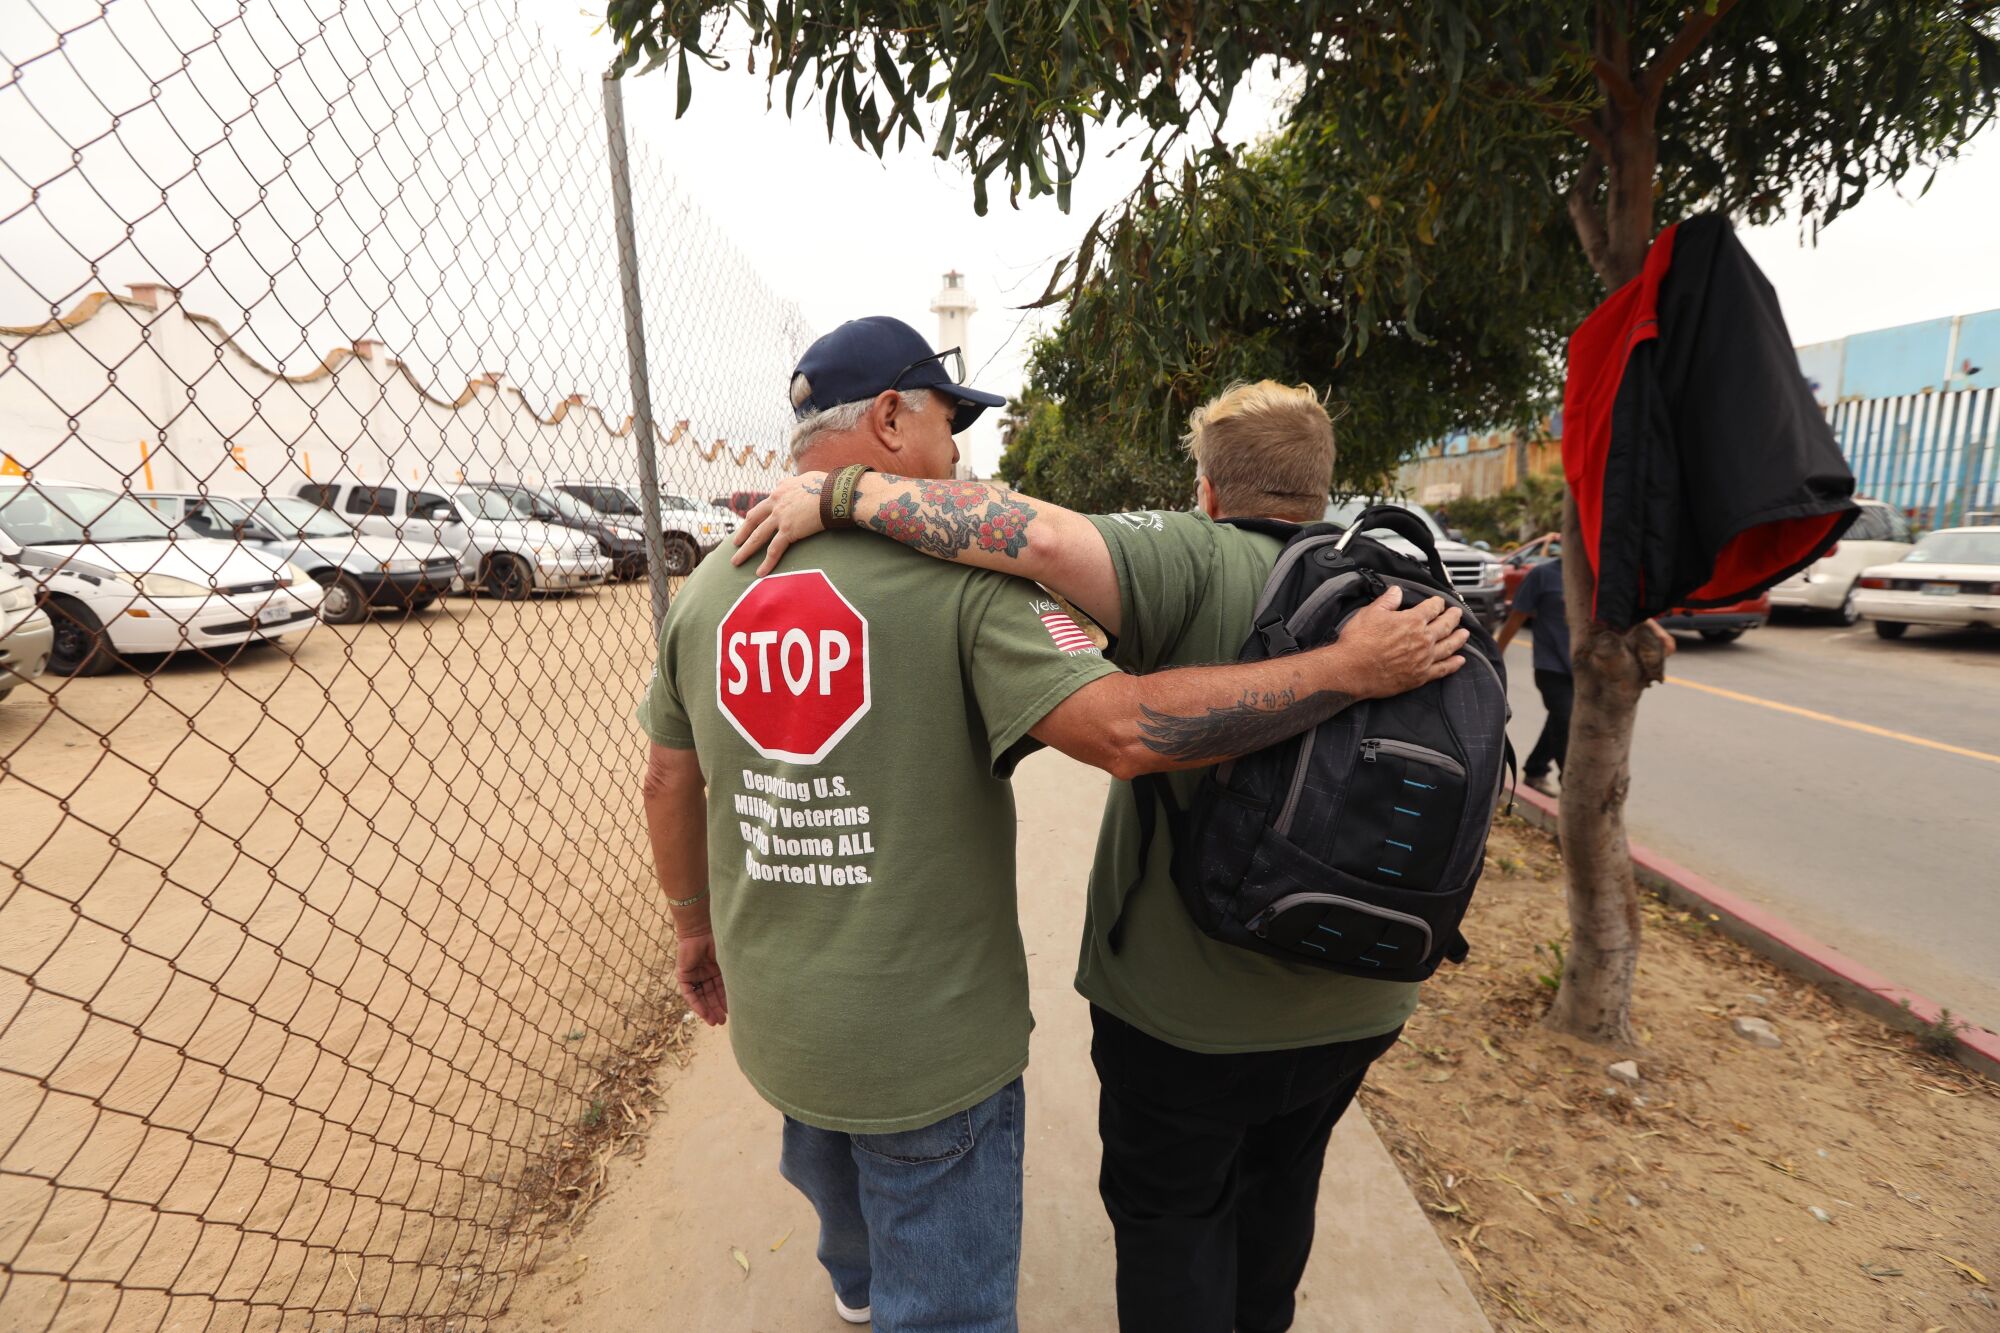 Jenn Budd, right, and deported U.S. veteran Robert Vivar, 63, walk with their arms around each other